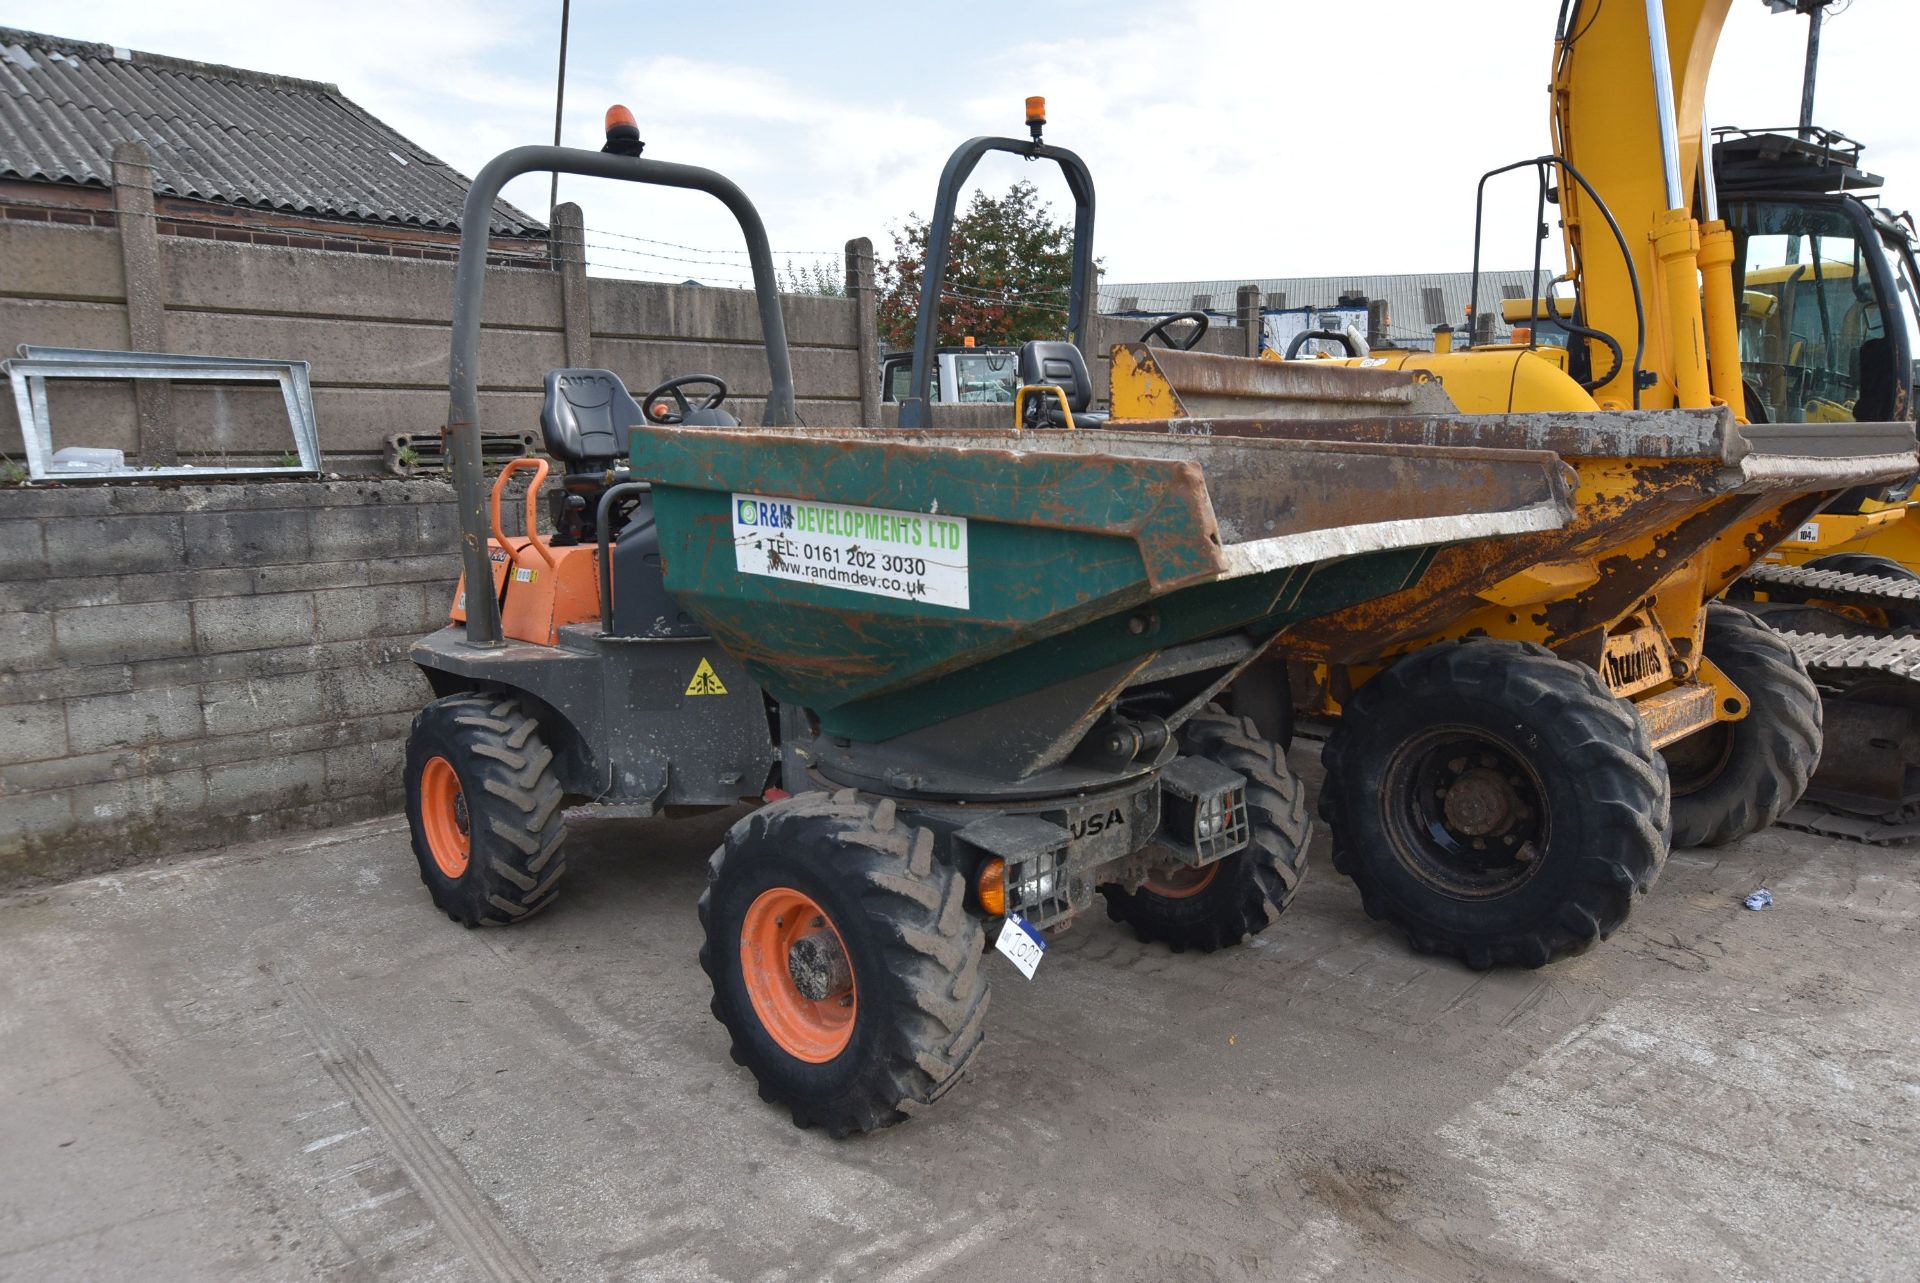 Ausa D350AHG 3T SWIVEL ARTICULATED DUMPER, serial no. 65165015, year of manufacture 2011, hours